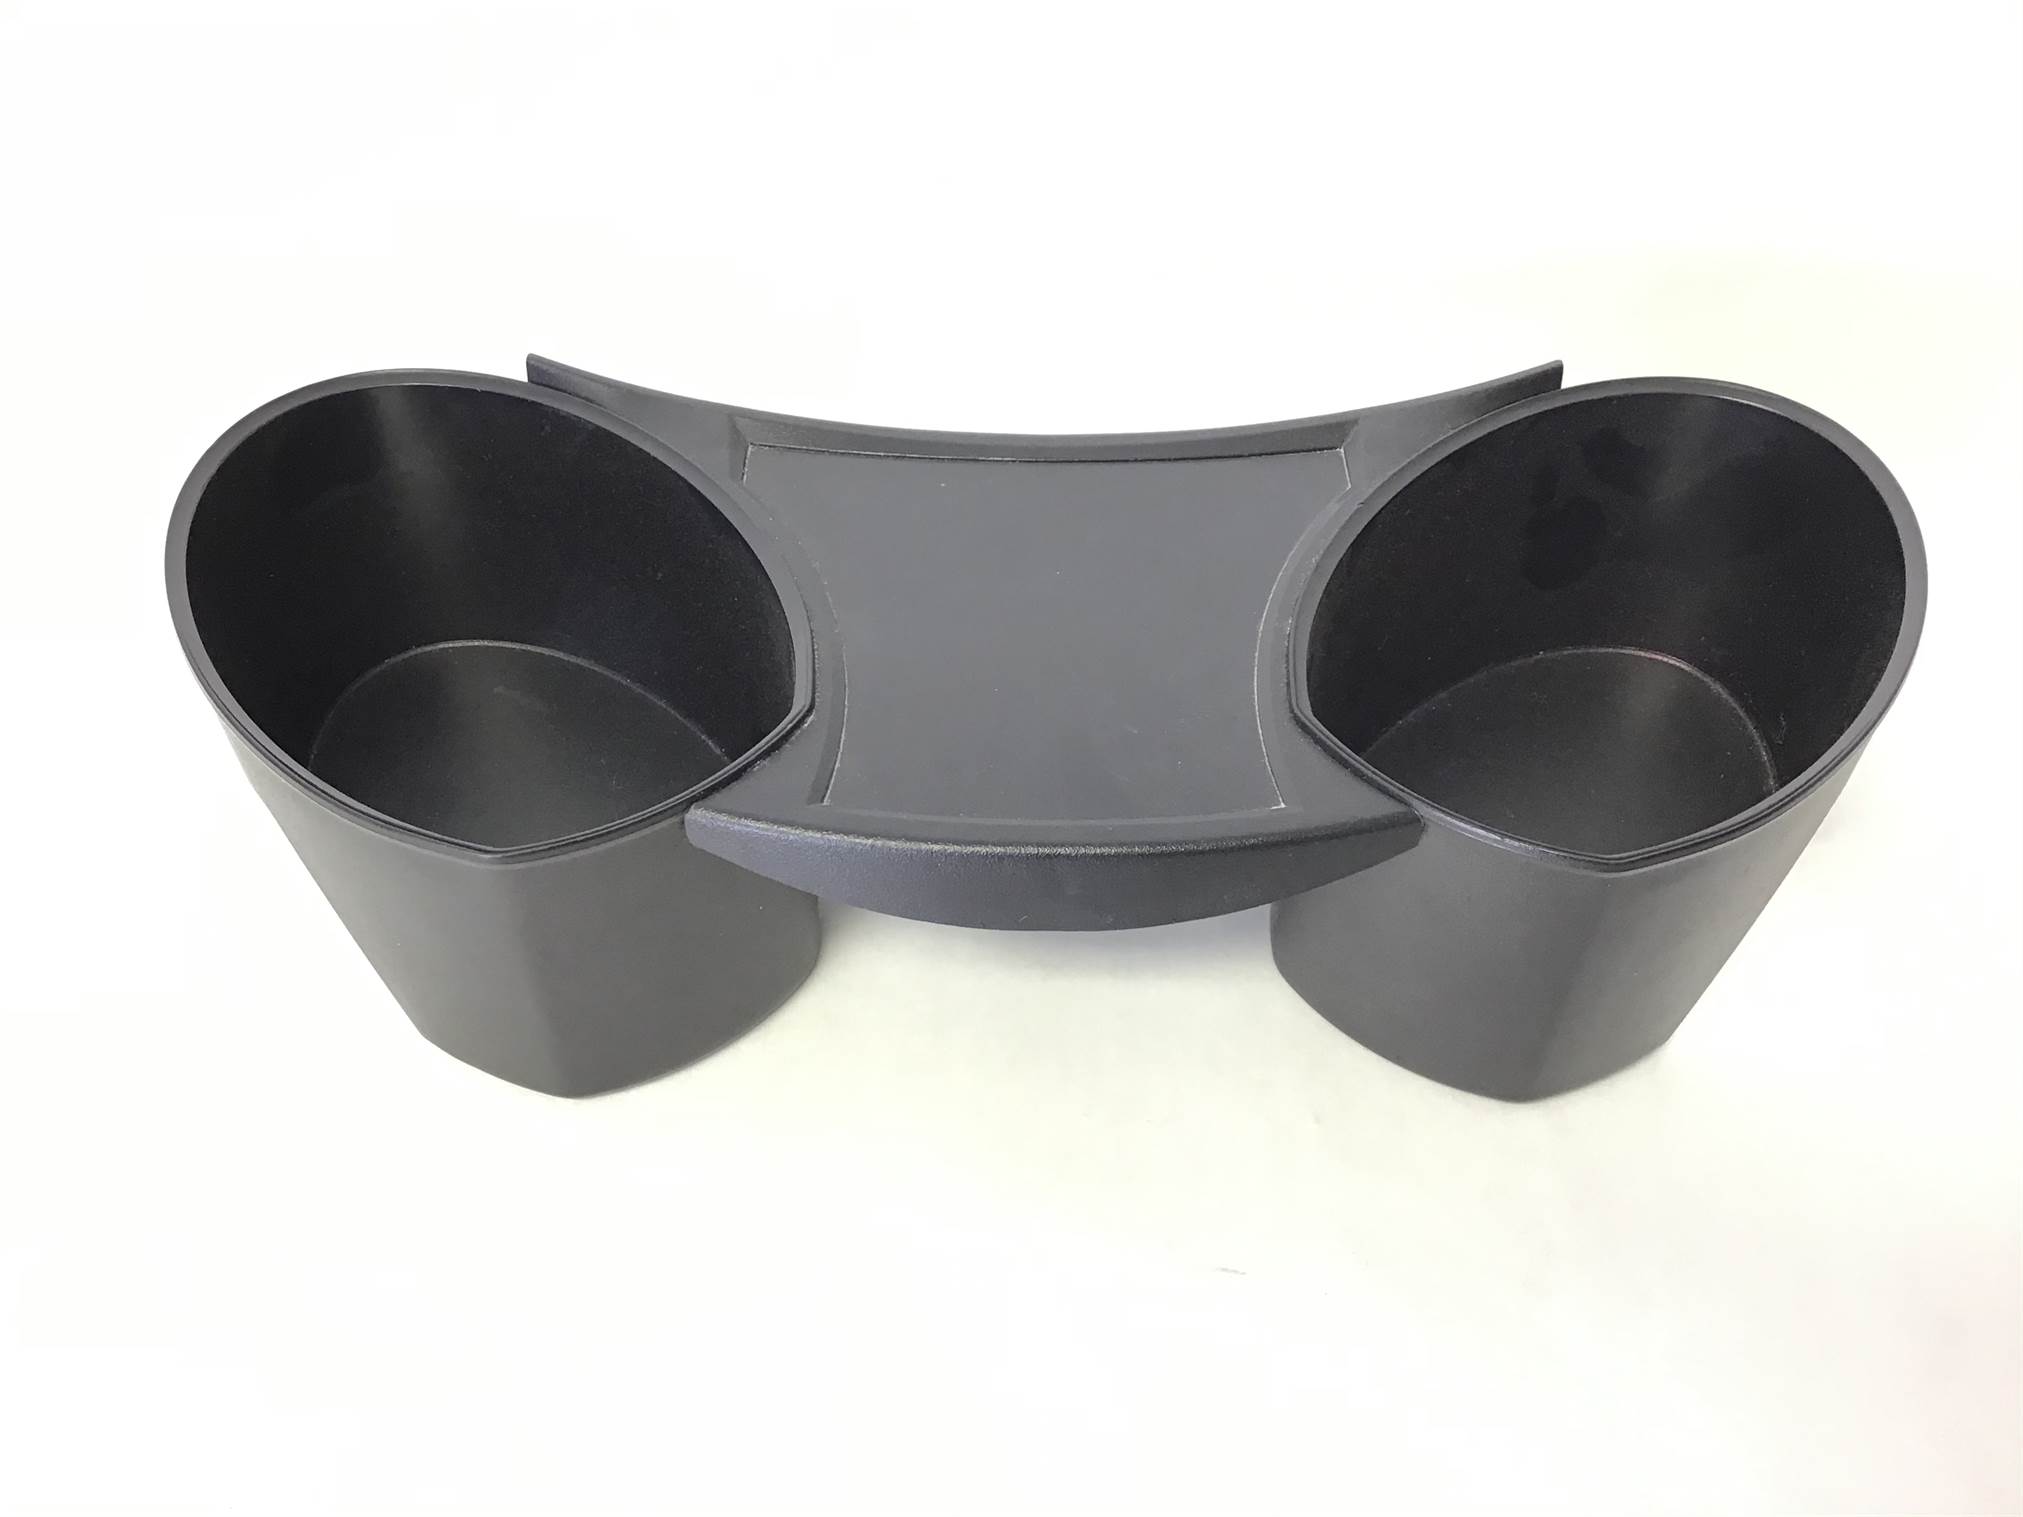 Accessory Tray - Cup Holder (Used)